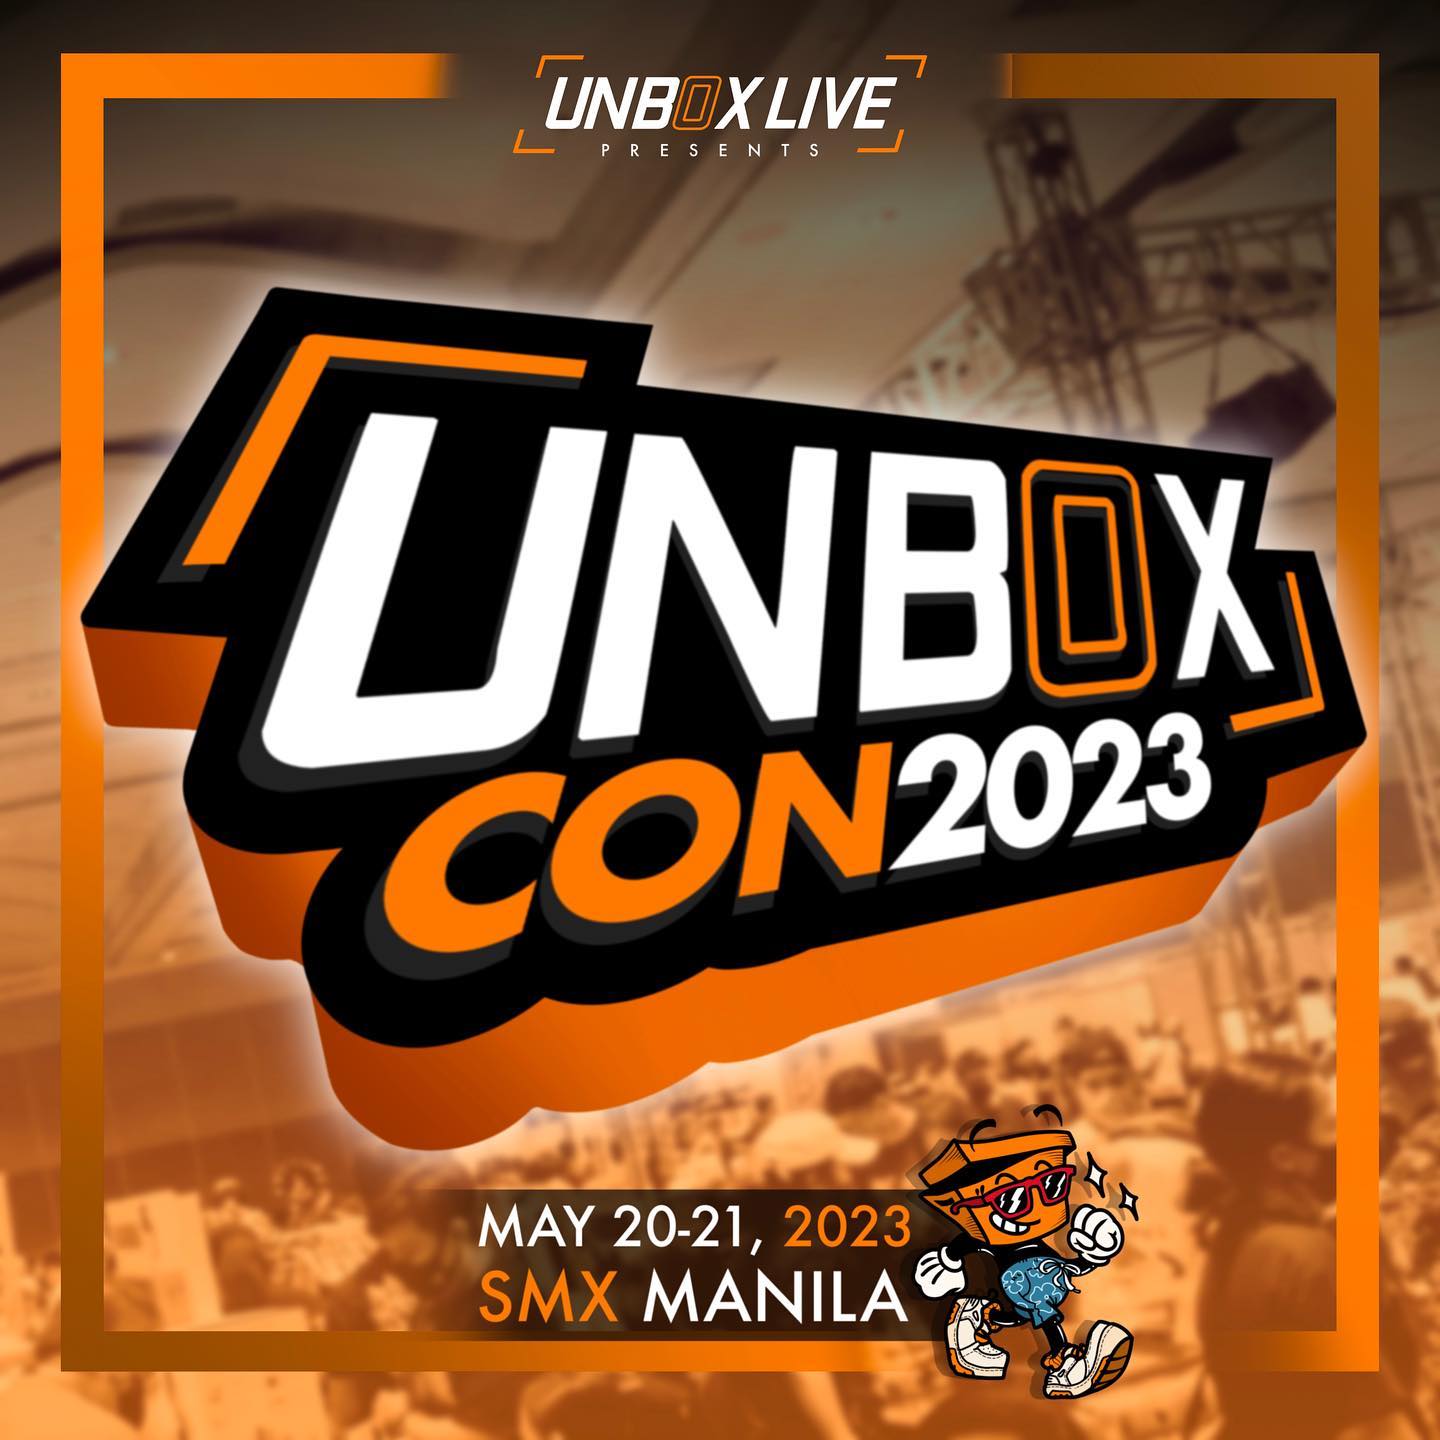 Unbox Con 2023 poster